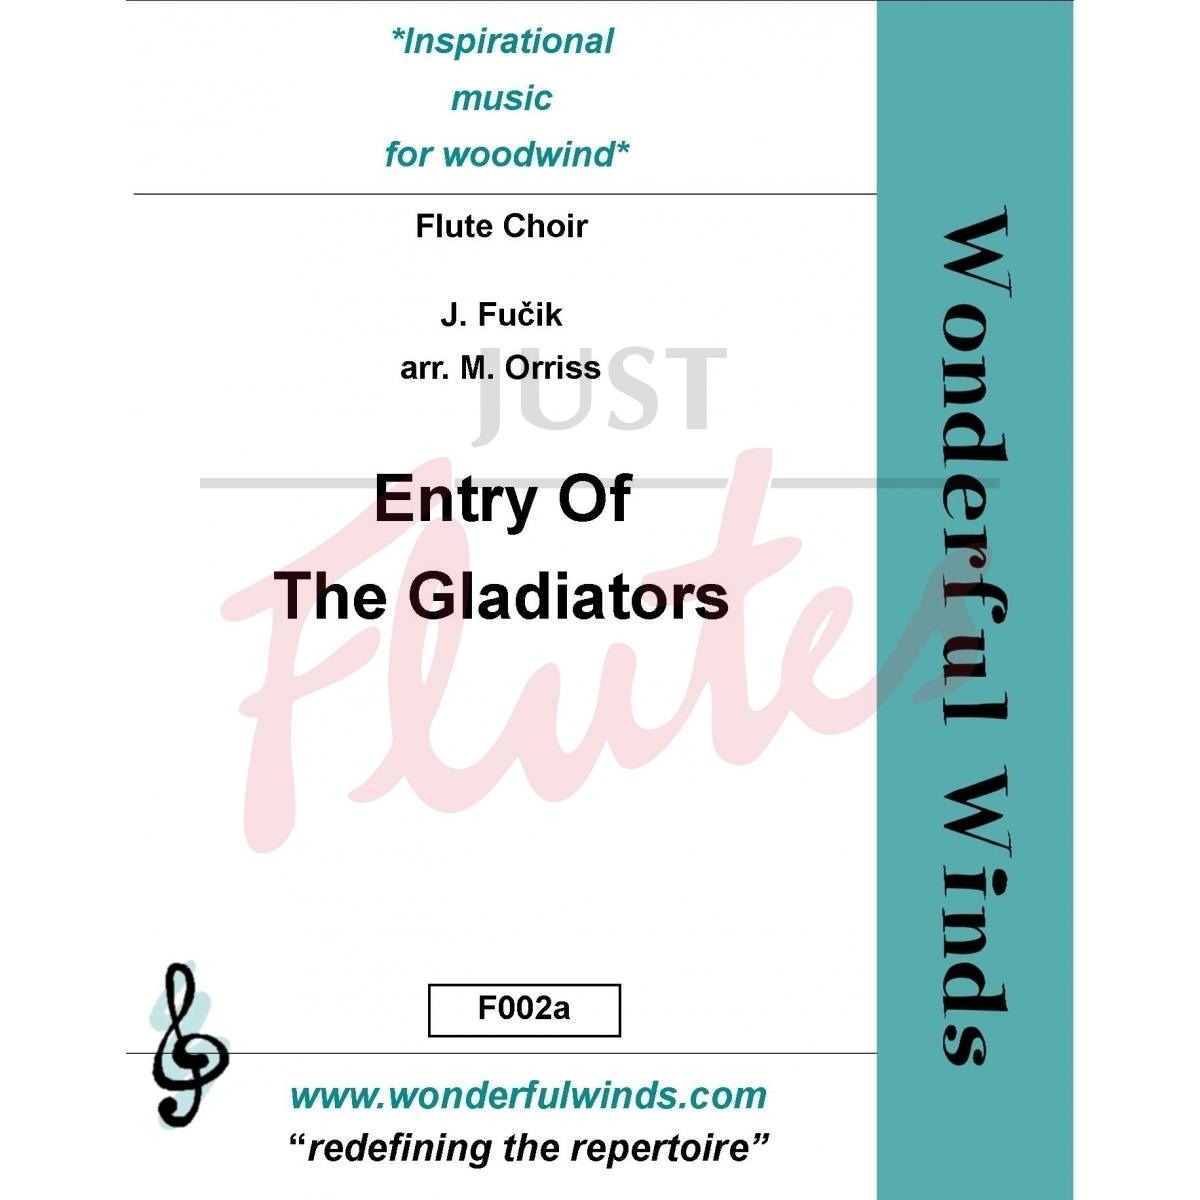 Entry of the Gladiators